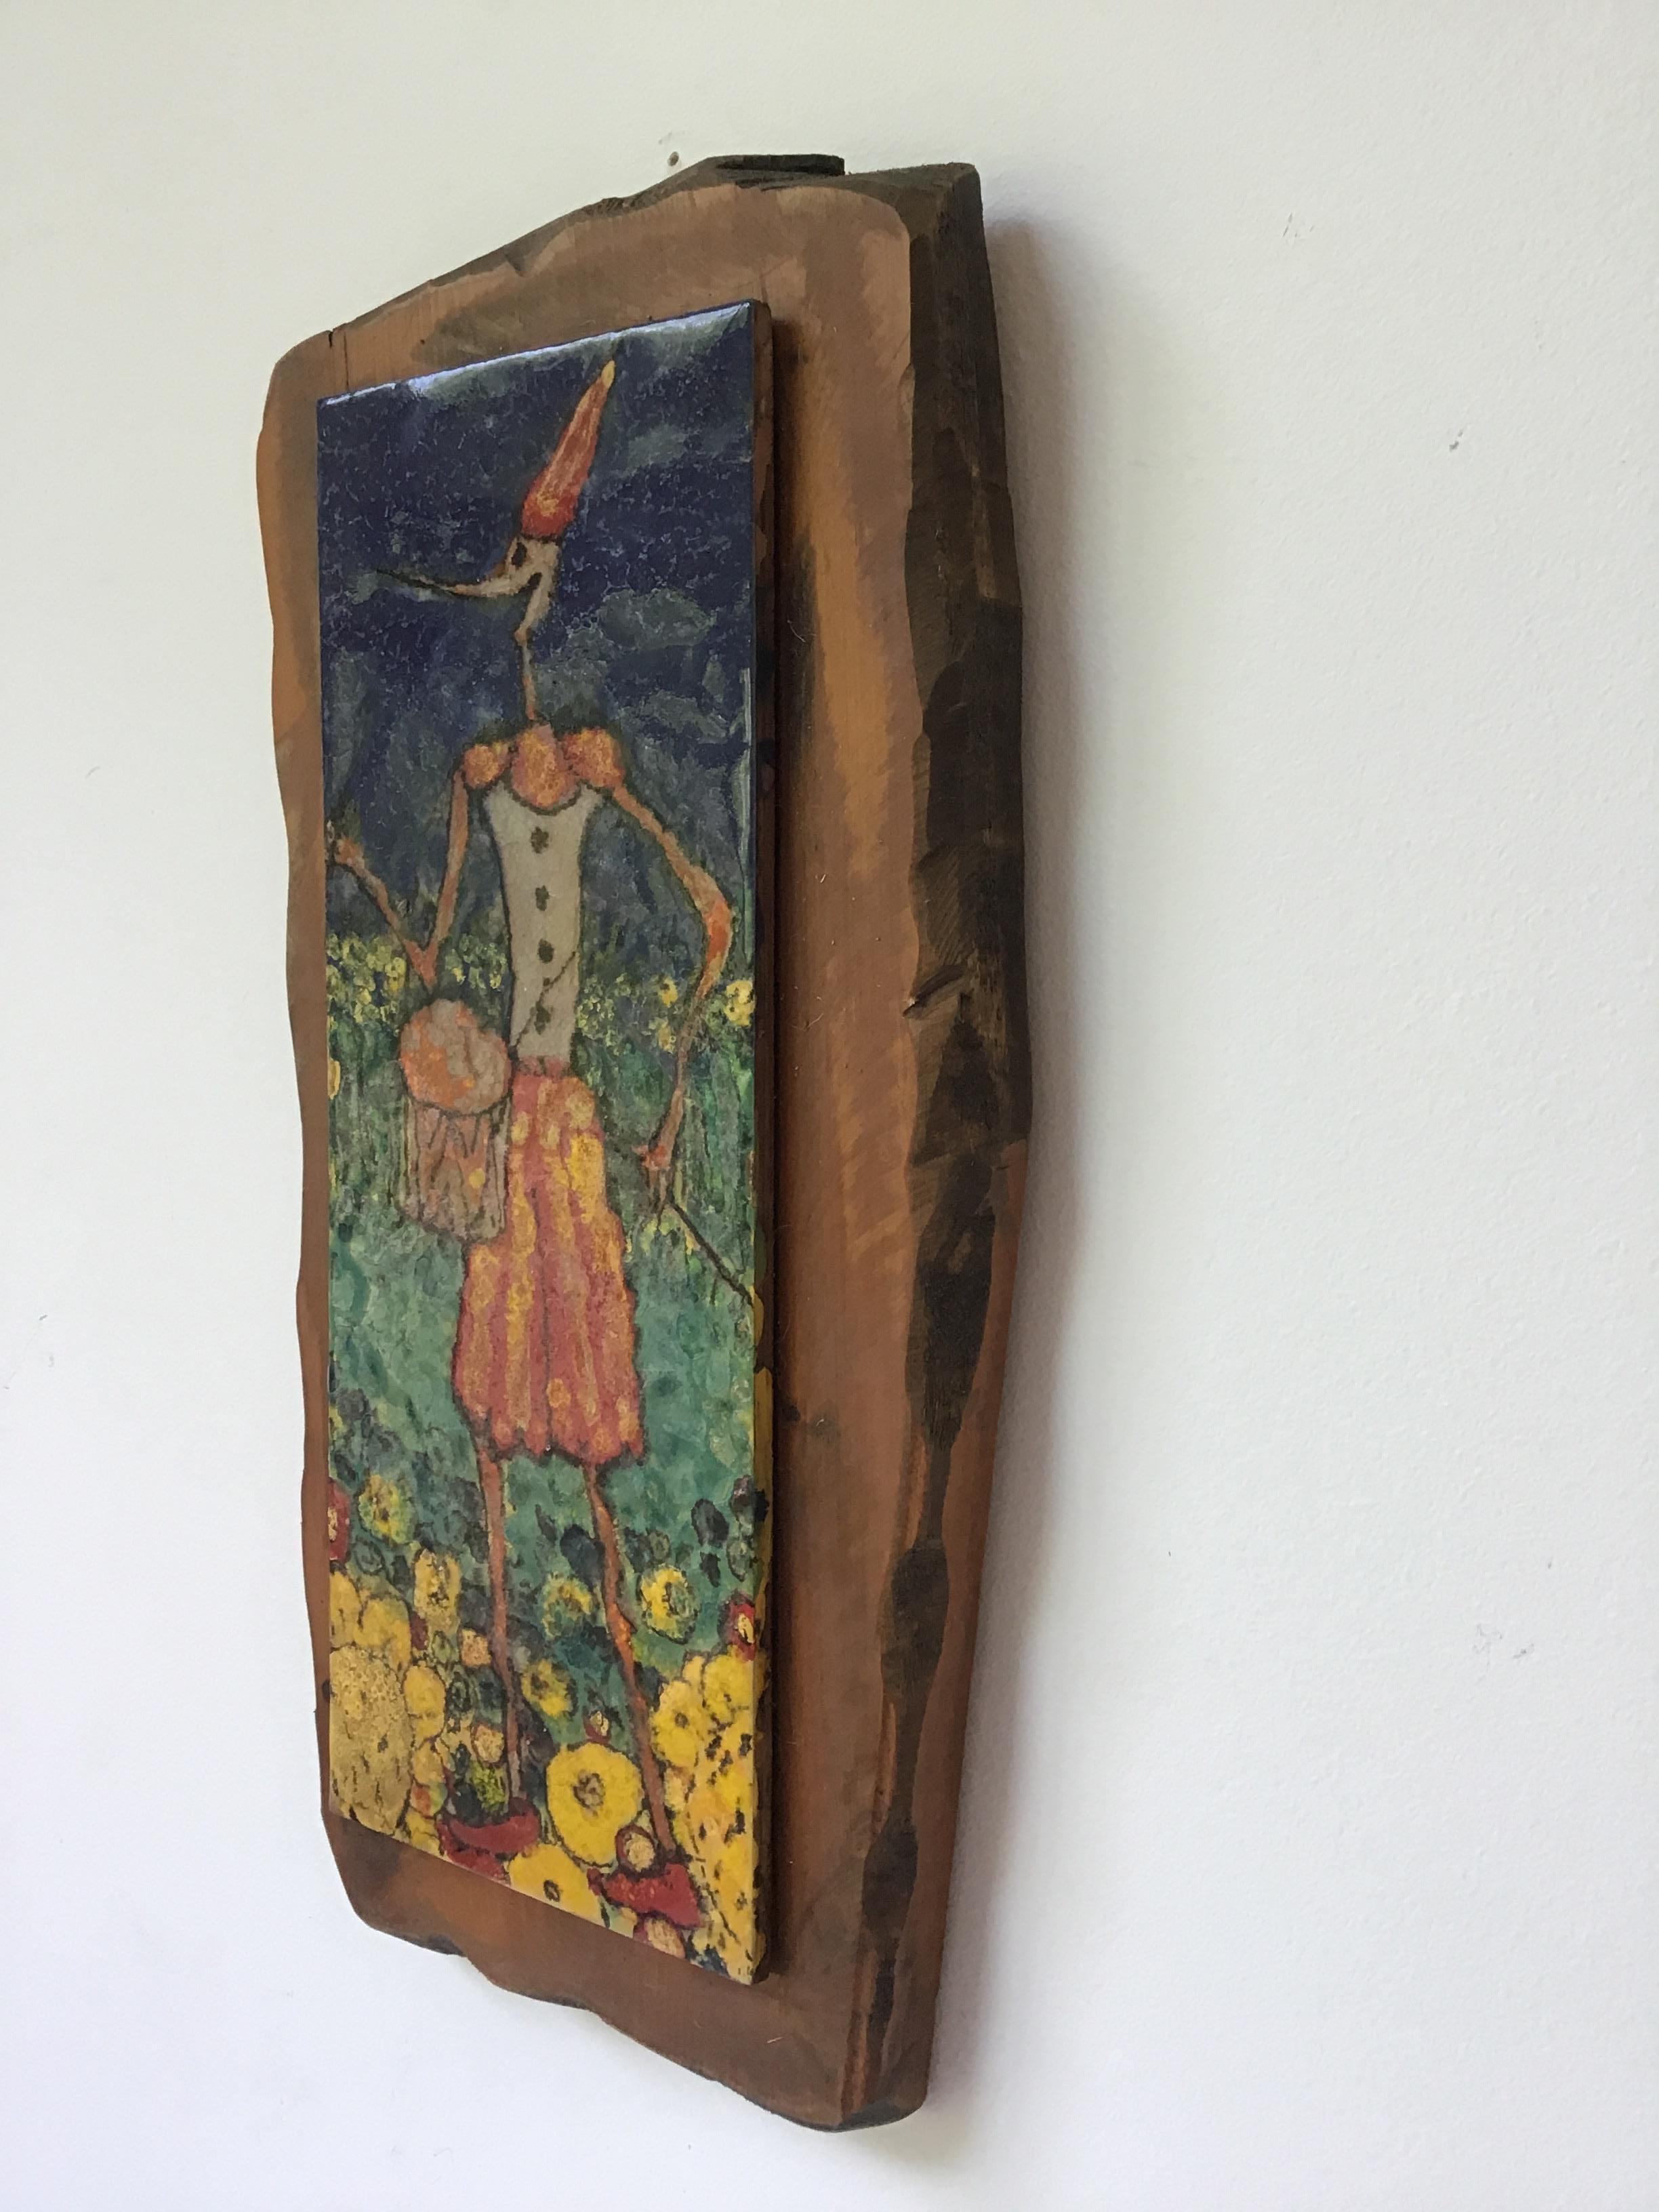 1950s Italian ceramic plaque mounted on wood of a drummer boy.